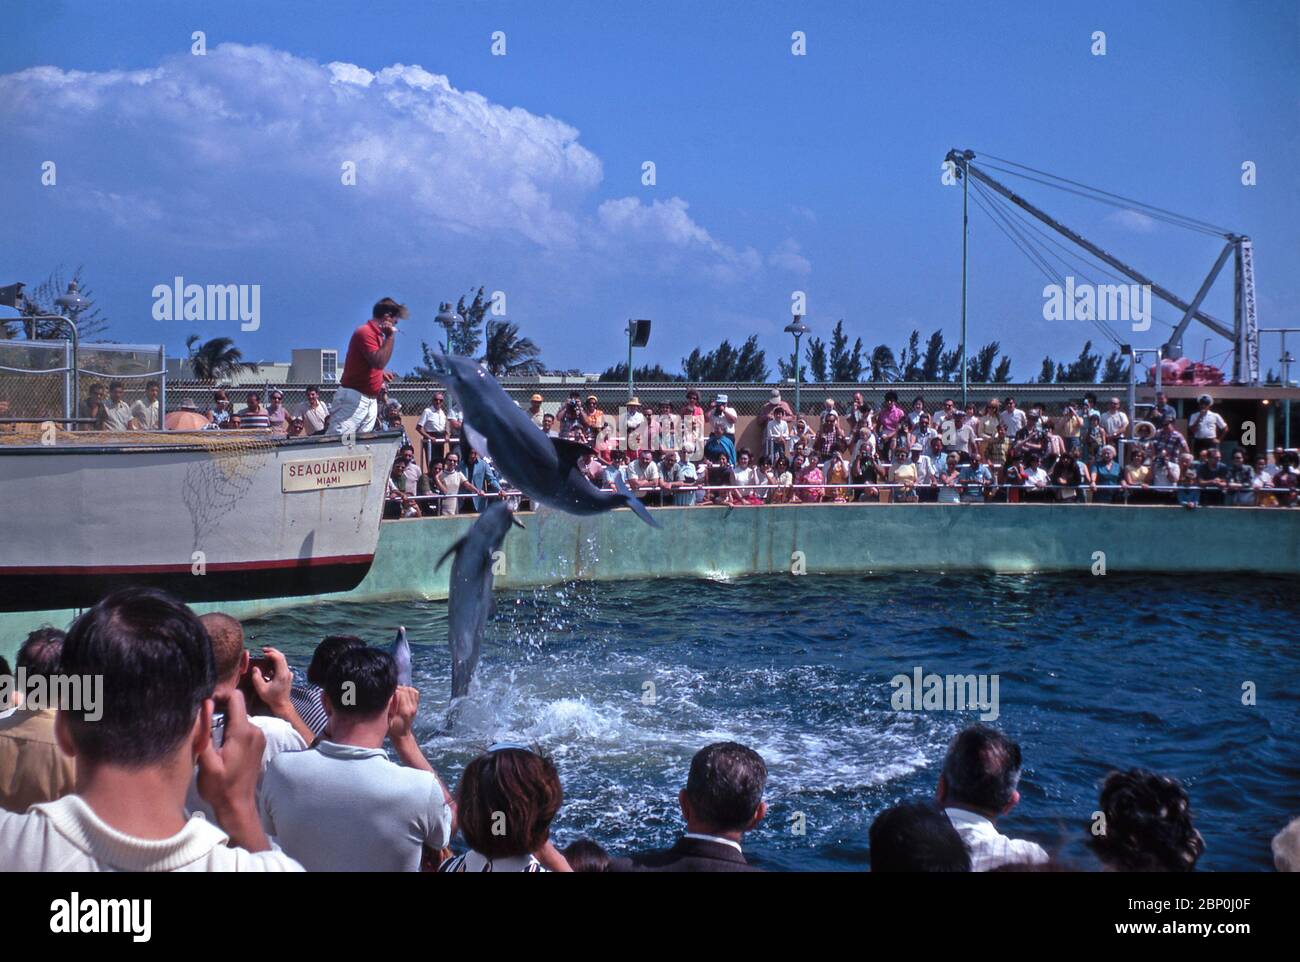 A bottlenose dolphin leaps to take a fish from its trainer during a show at the Miami Seaquarium, Virginia Key, Biscayne Bay, Miami, Florida, USA 1967. The Seaquarium is a large oceanarium theme park. As well as marine mammals, the Seaquarium is home to fish, sharks, sea turtles, birds, reptiles, and manatees. The park was founded by Fred D Coppock and Captain W B Gray and was the second marine-life attraction in Florida. When it opened in 1955, was the largest marine-life attraction in the world. Stock Photo